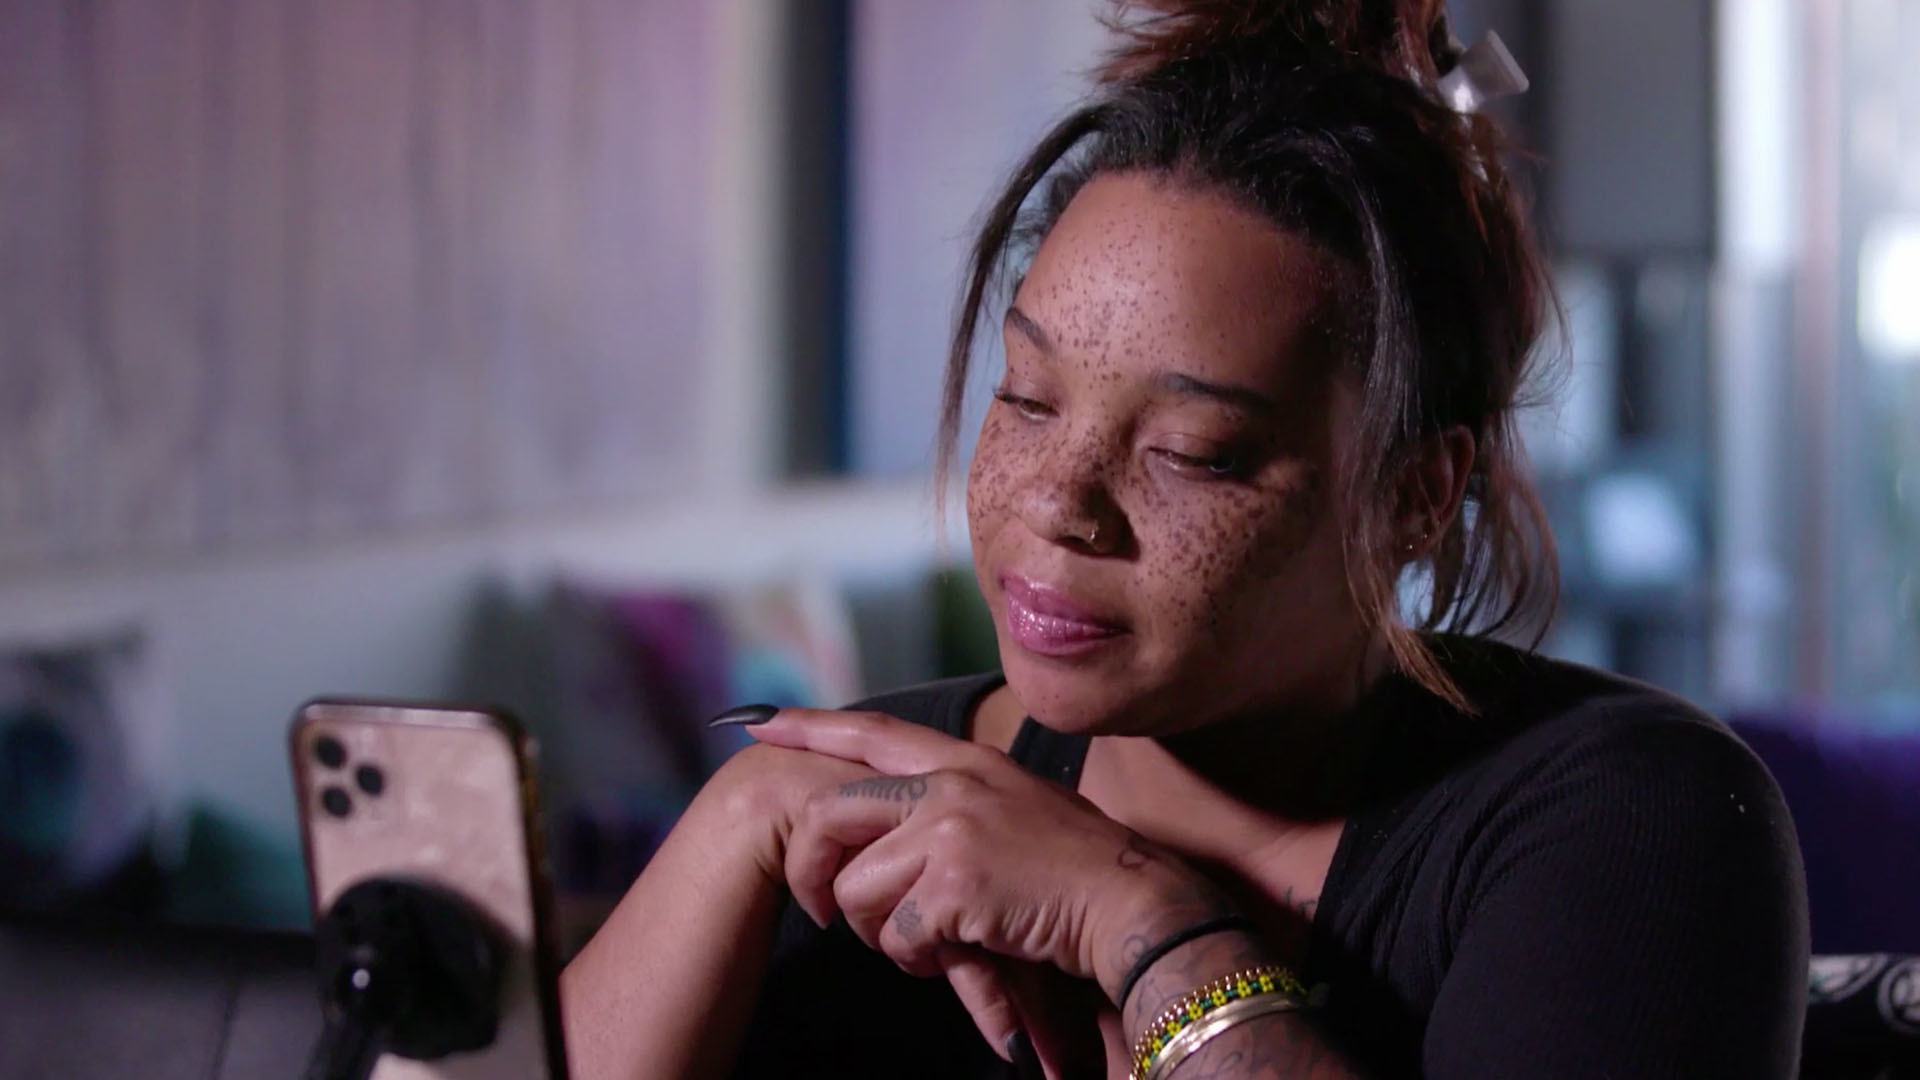 Watch Briana's Traumatic Arrest! | Growing Up Hip Hop Video Extras